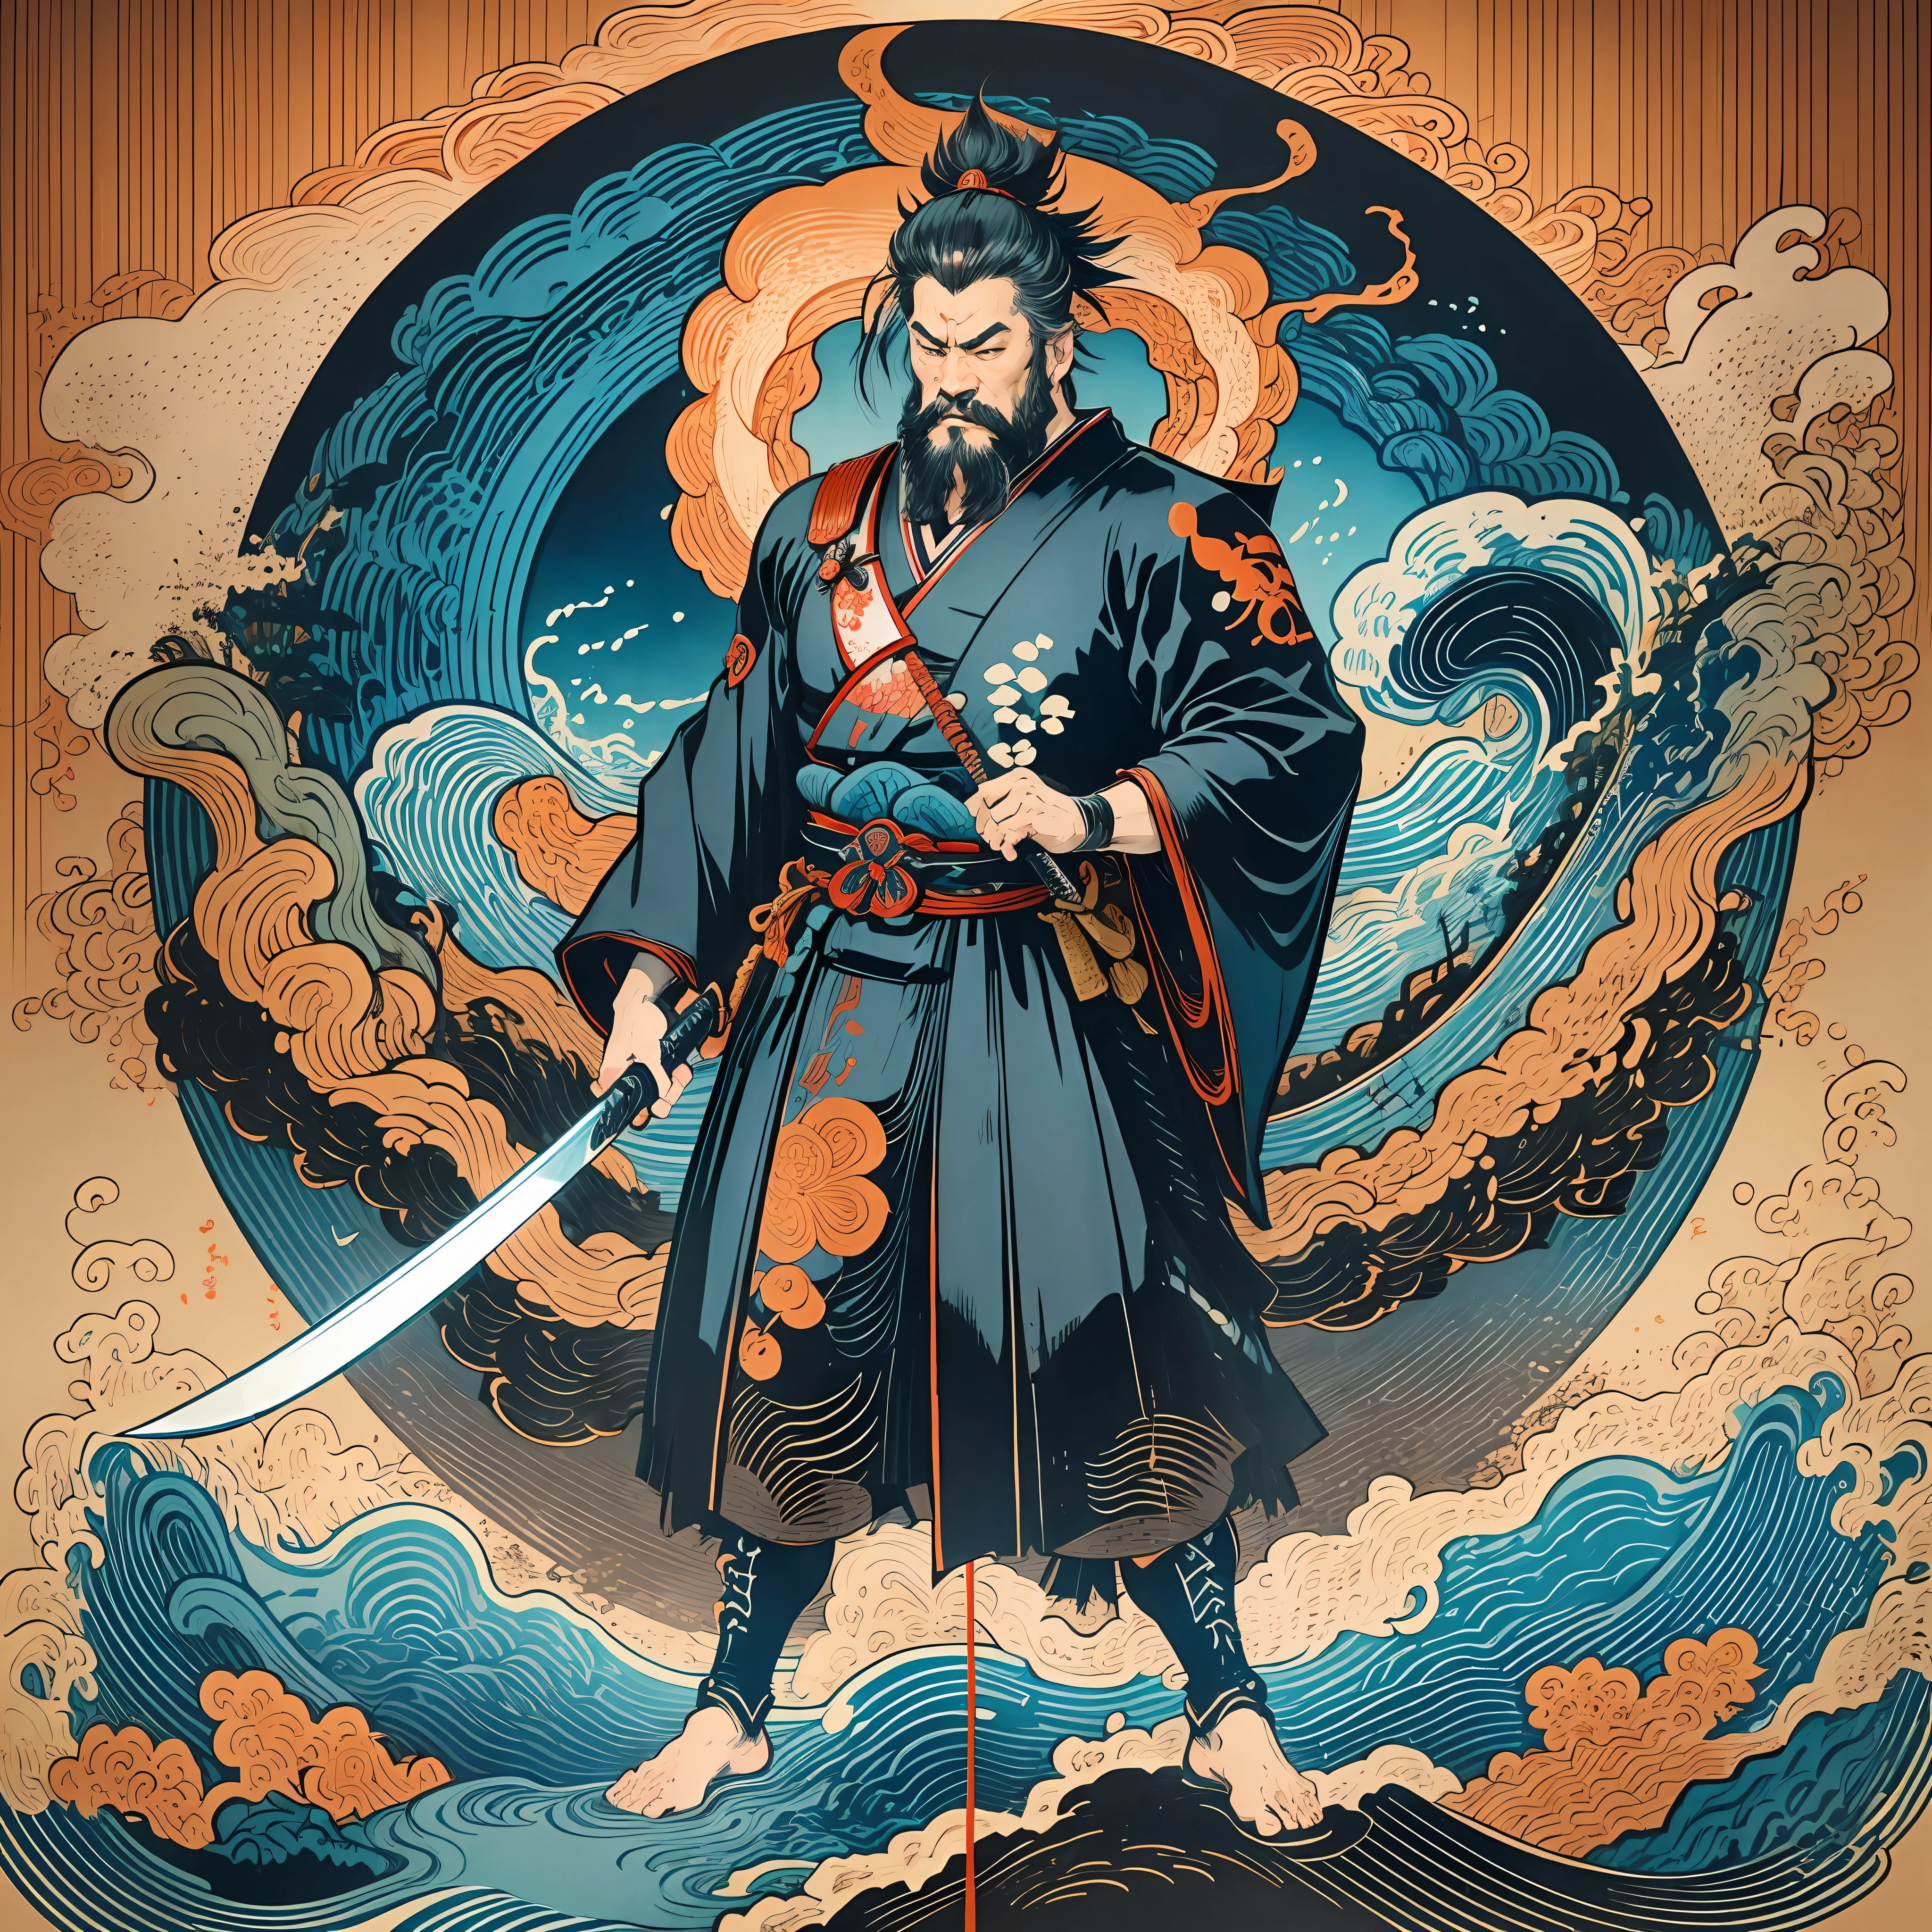 It is a full-body painting with natural colors with Katsushika Hokusai-style line drawings. The swordsman Miyamoto Musashi has a big body like a strongman. Samurai of Japan. With a dignified but manly expression of determination, he confronts evil spirits. He has black short hair and a short, trimmed beard. His upper body is covered in a black kimono and his hakama is knee-long. In his right hand he holds a Japan sword with a longer sword part. In the highest quality, masterpiece high resolution ukiyo-e style lightning and swirling flames. Among them, Miyamoto Musashi is standing with his back straight, facing the front.